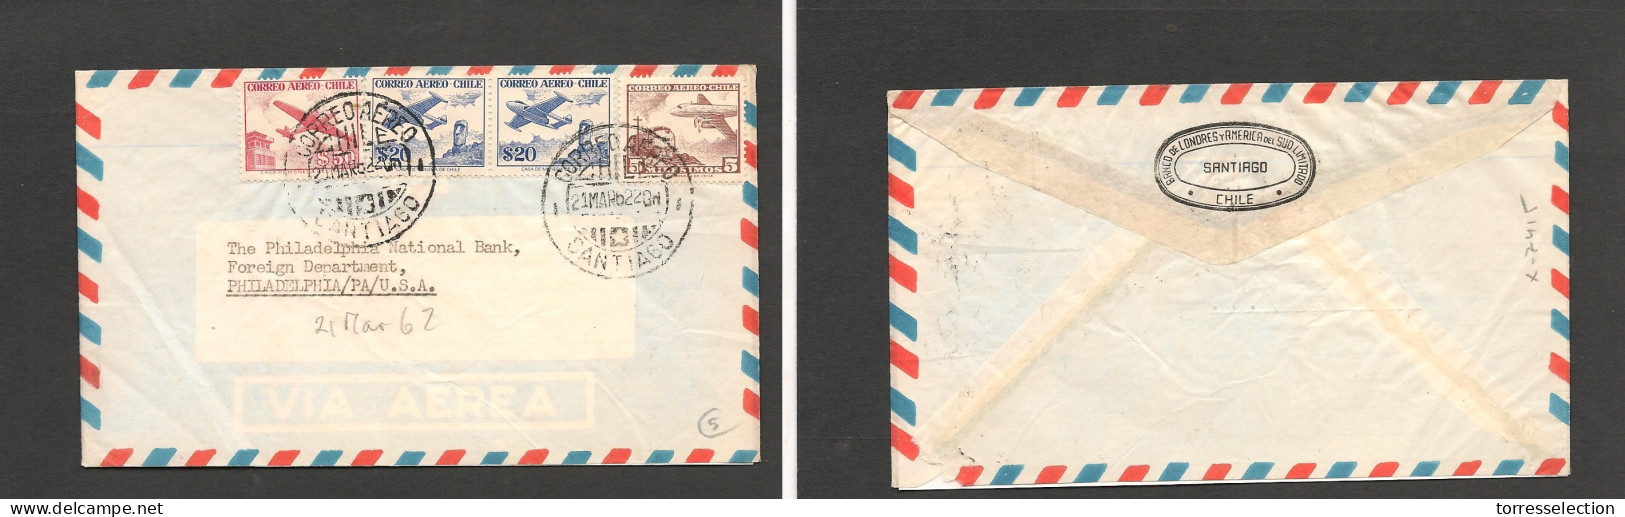 CHILE. Chile - Cover - 1962 21 March Stgo To USA Pha Air Mult Fkd Env $90,05 RateEx-Prof West UK Airmails Coll.- . Easy  - Chile